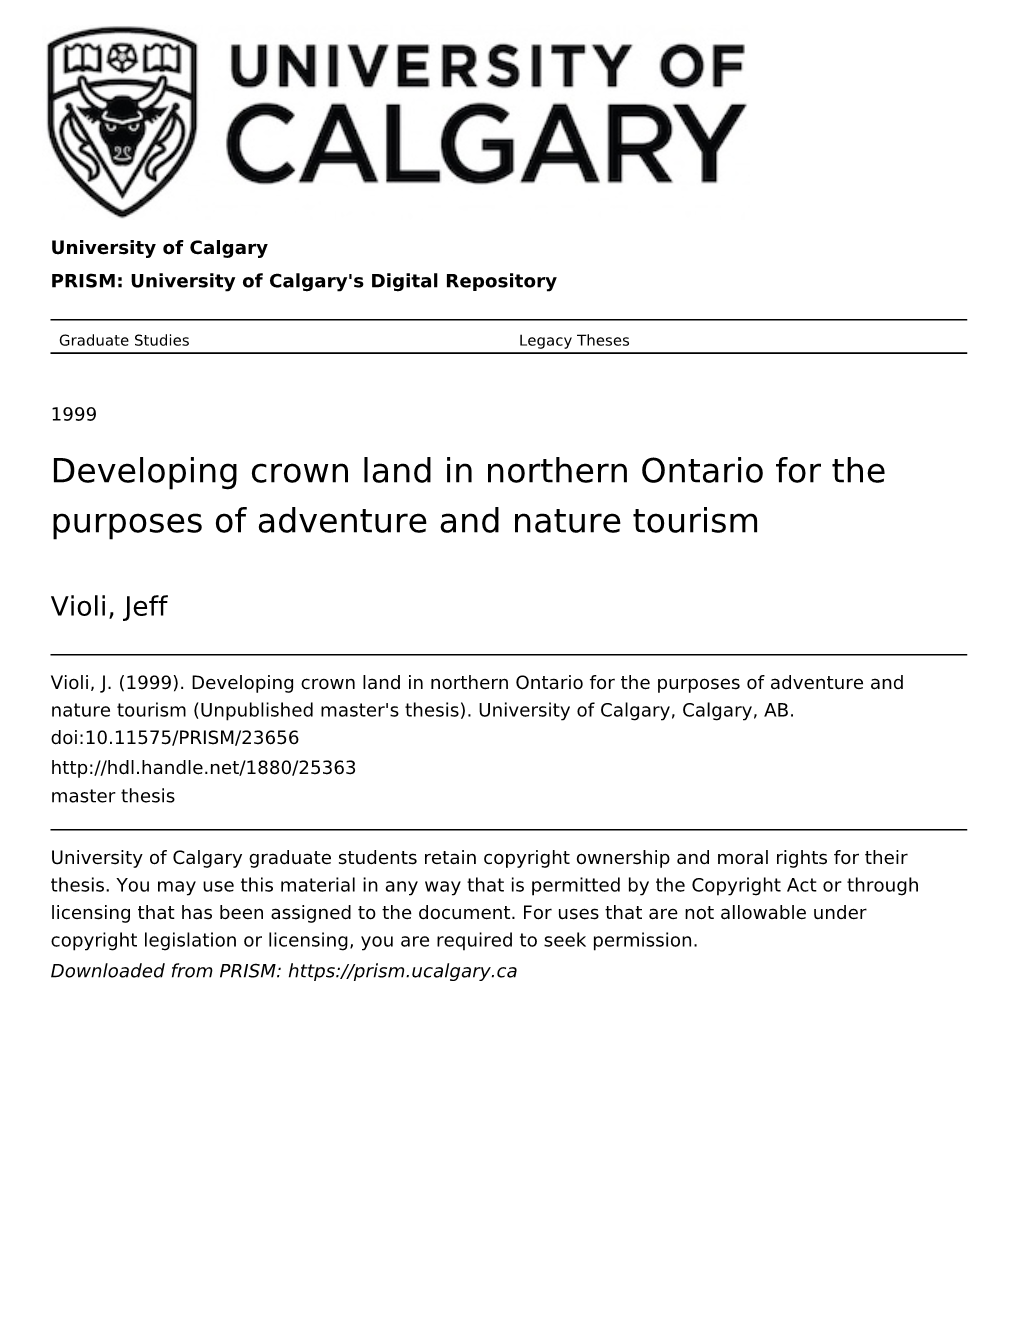 Developing Crown Land in Northern Ontario for the Purposes of Adventure and Nature Tourism